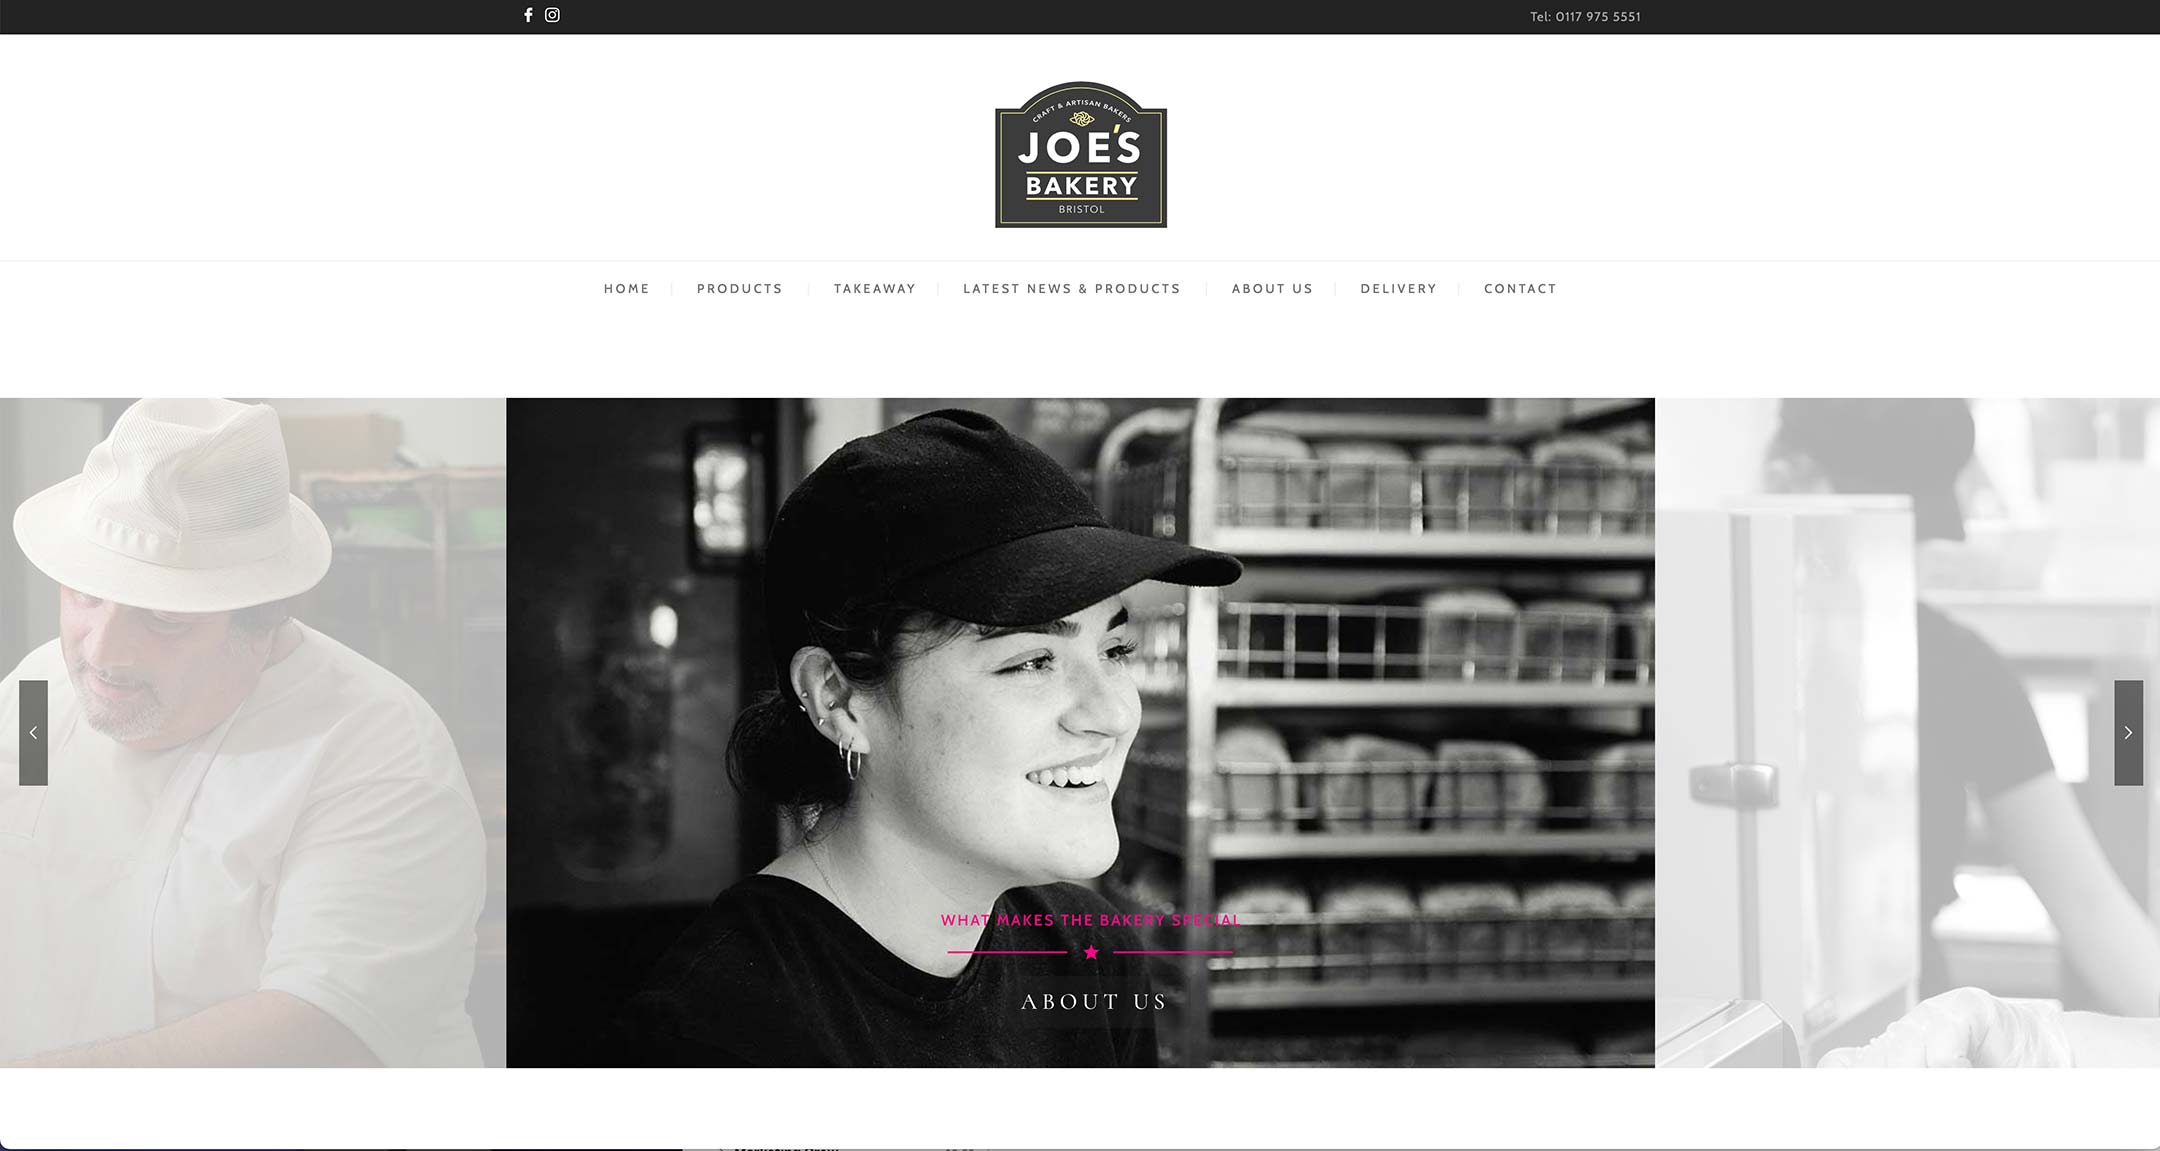 Smiling woman serving behind bakery counter